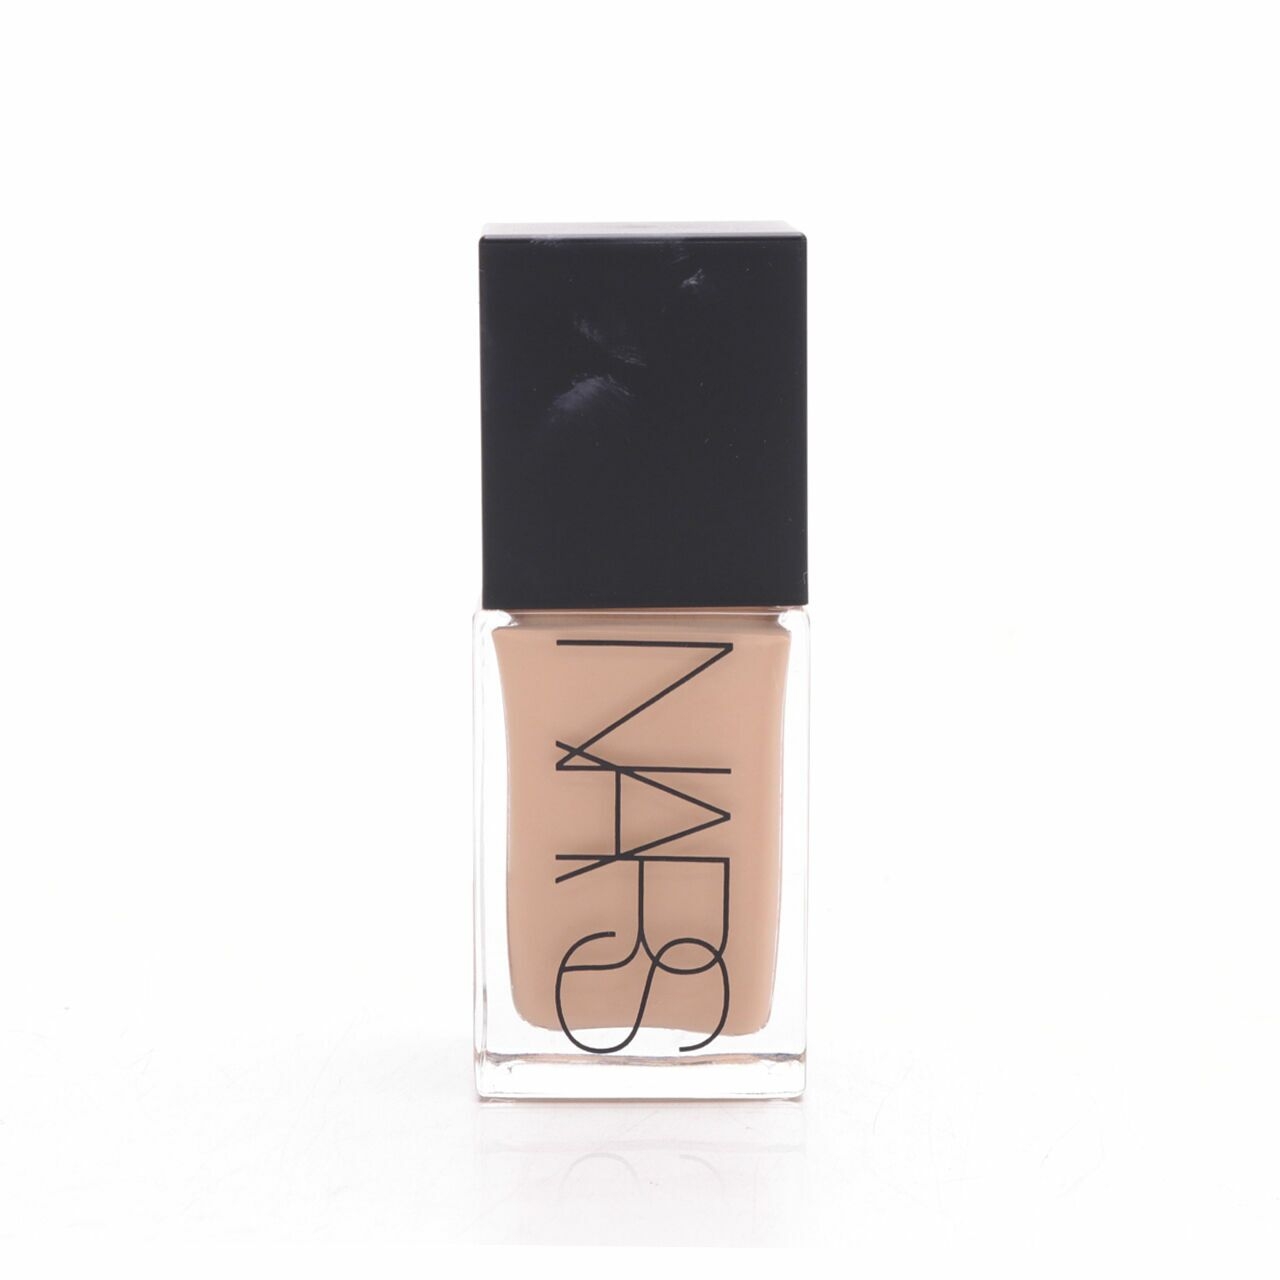 Nars Light Reflecting Foundation - Deauville Faces	